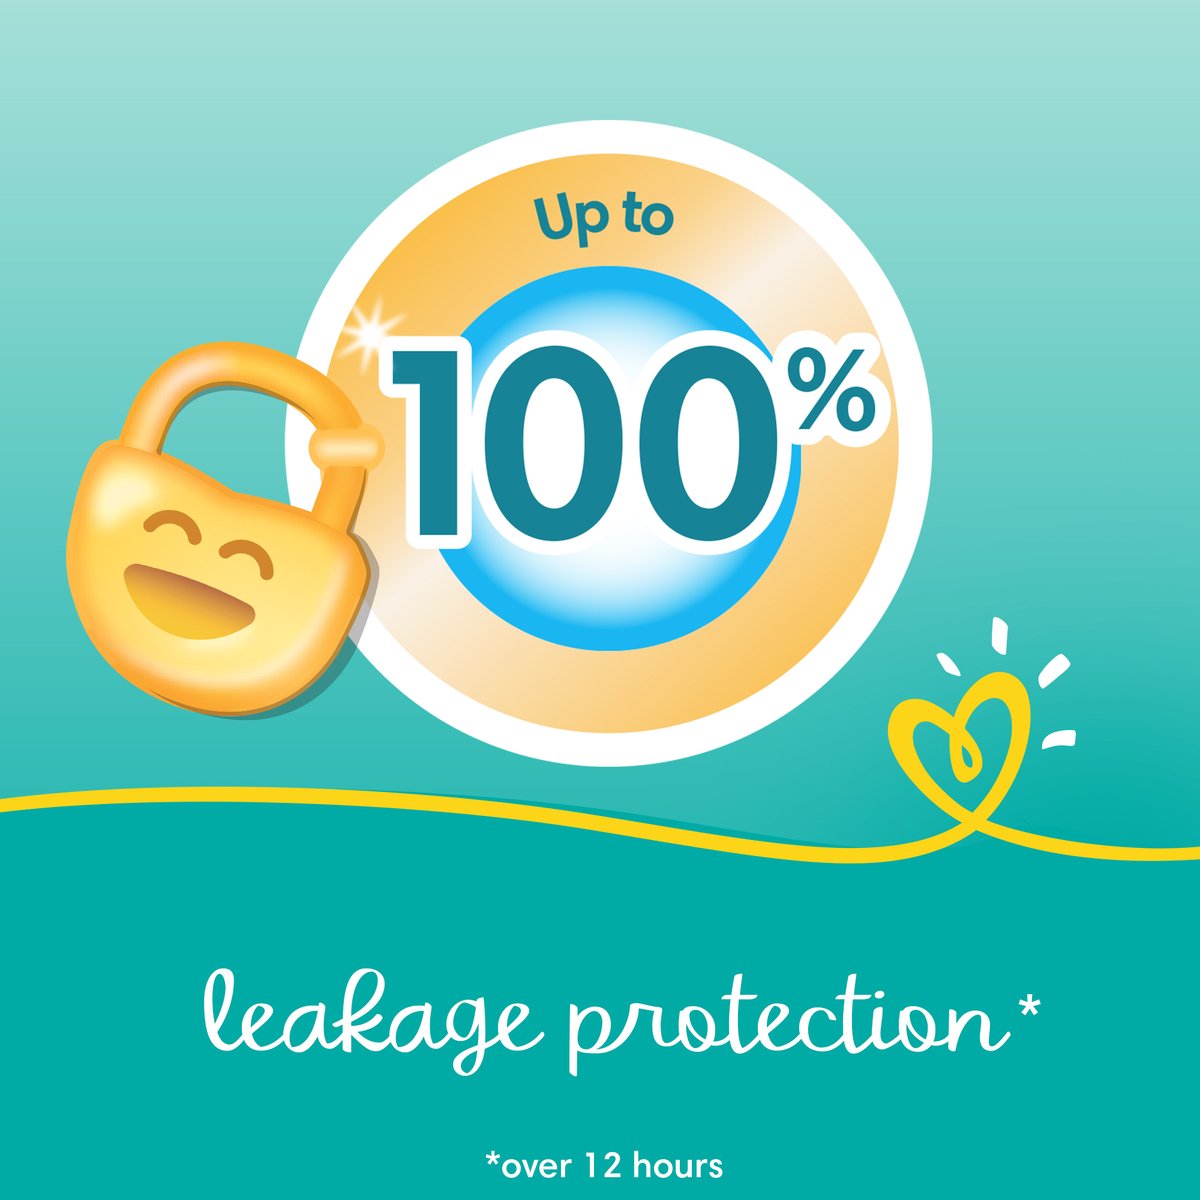 Pampers Baby-Dry Diapers Size 4, 10-15kg with Leakage Protection 40pcs